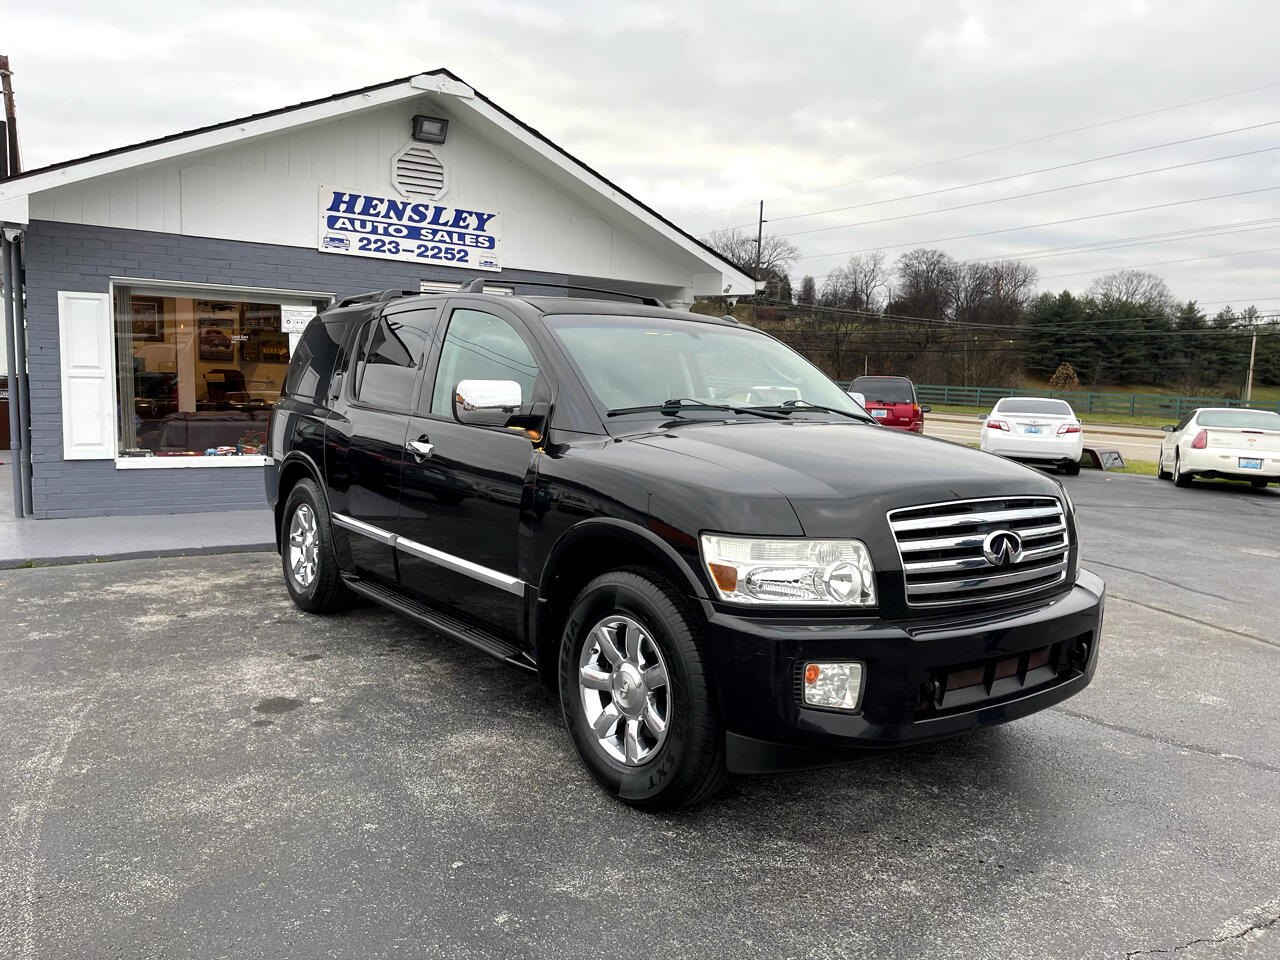 Used 2006 Infiniti QX56 AWD for Sale in Frankfort KY Hensley Auto Sales  Frankfort